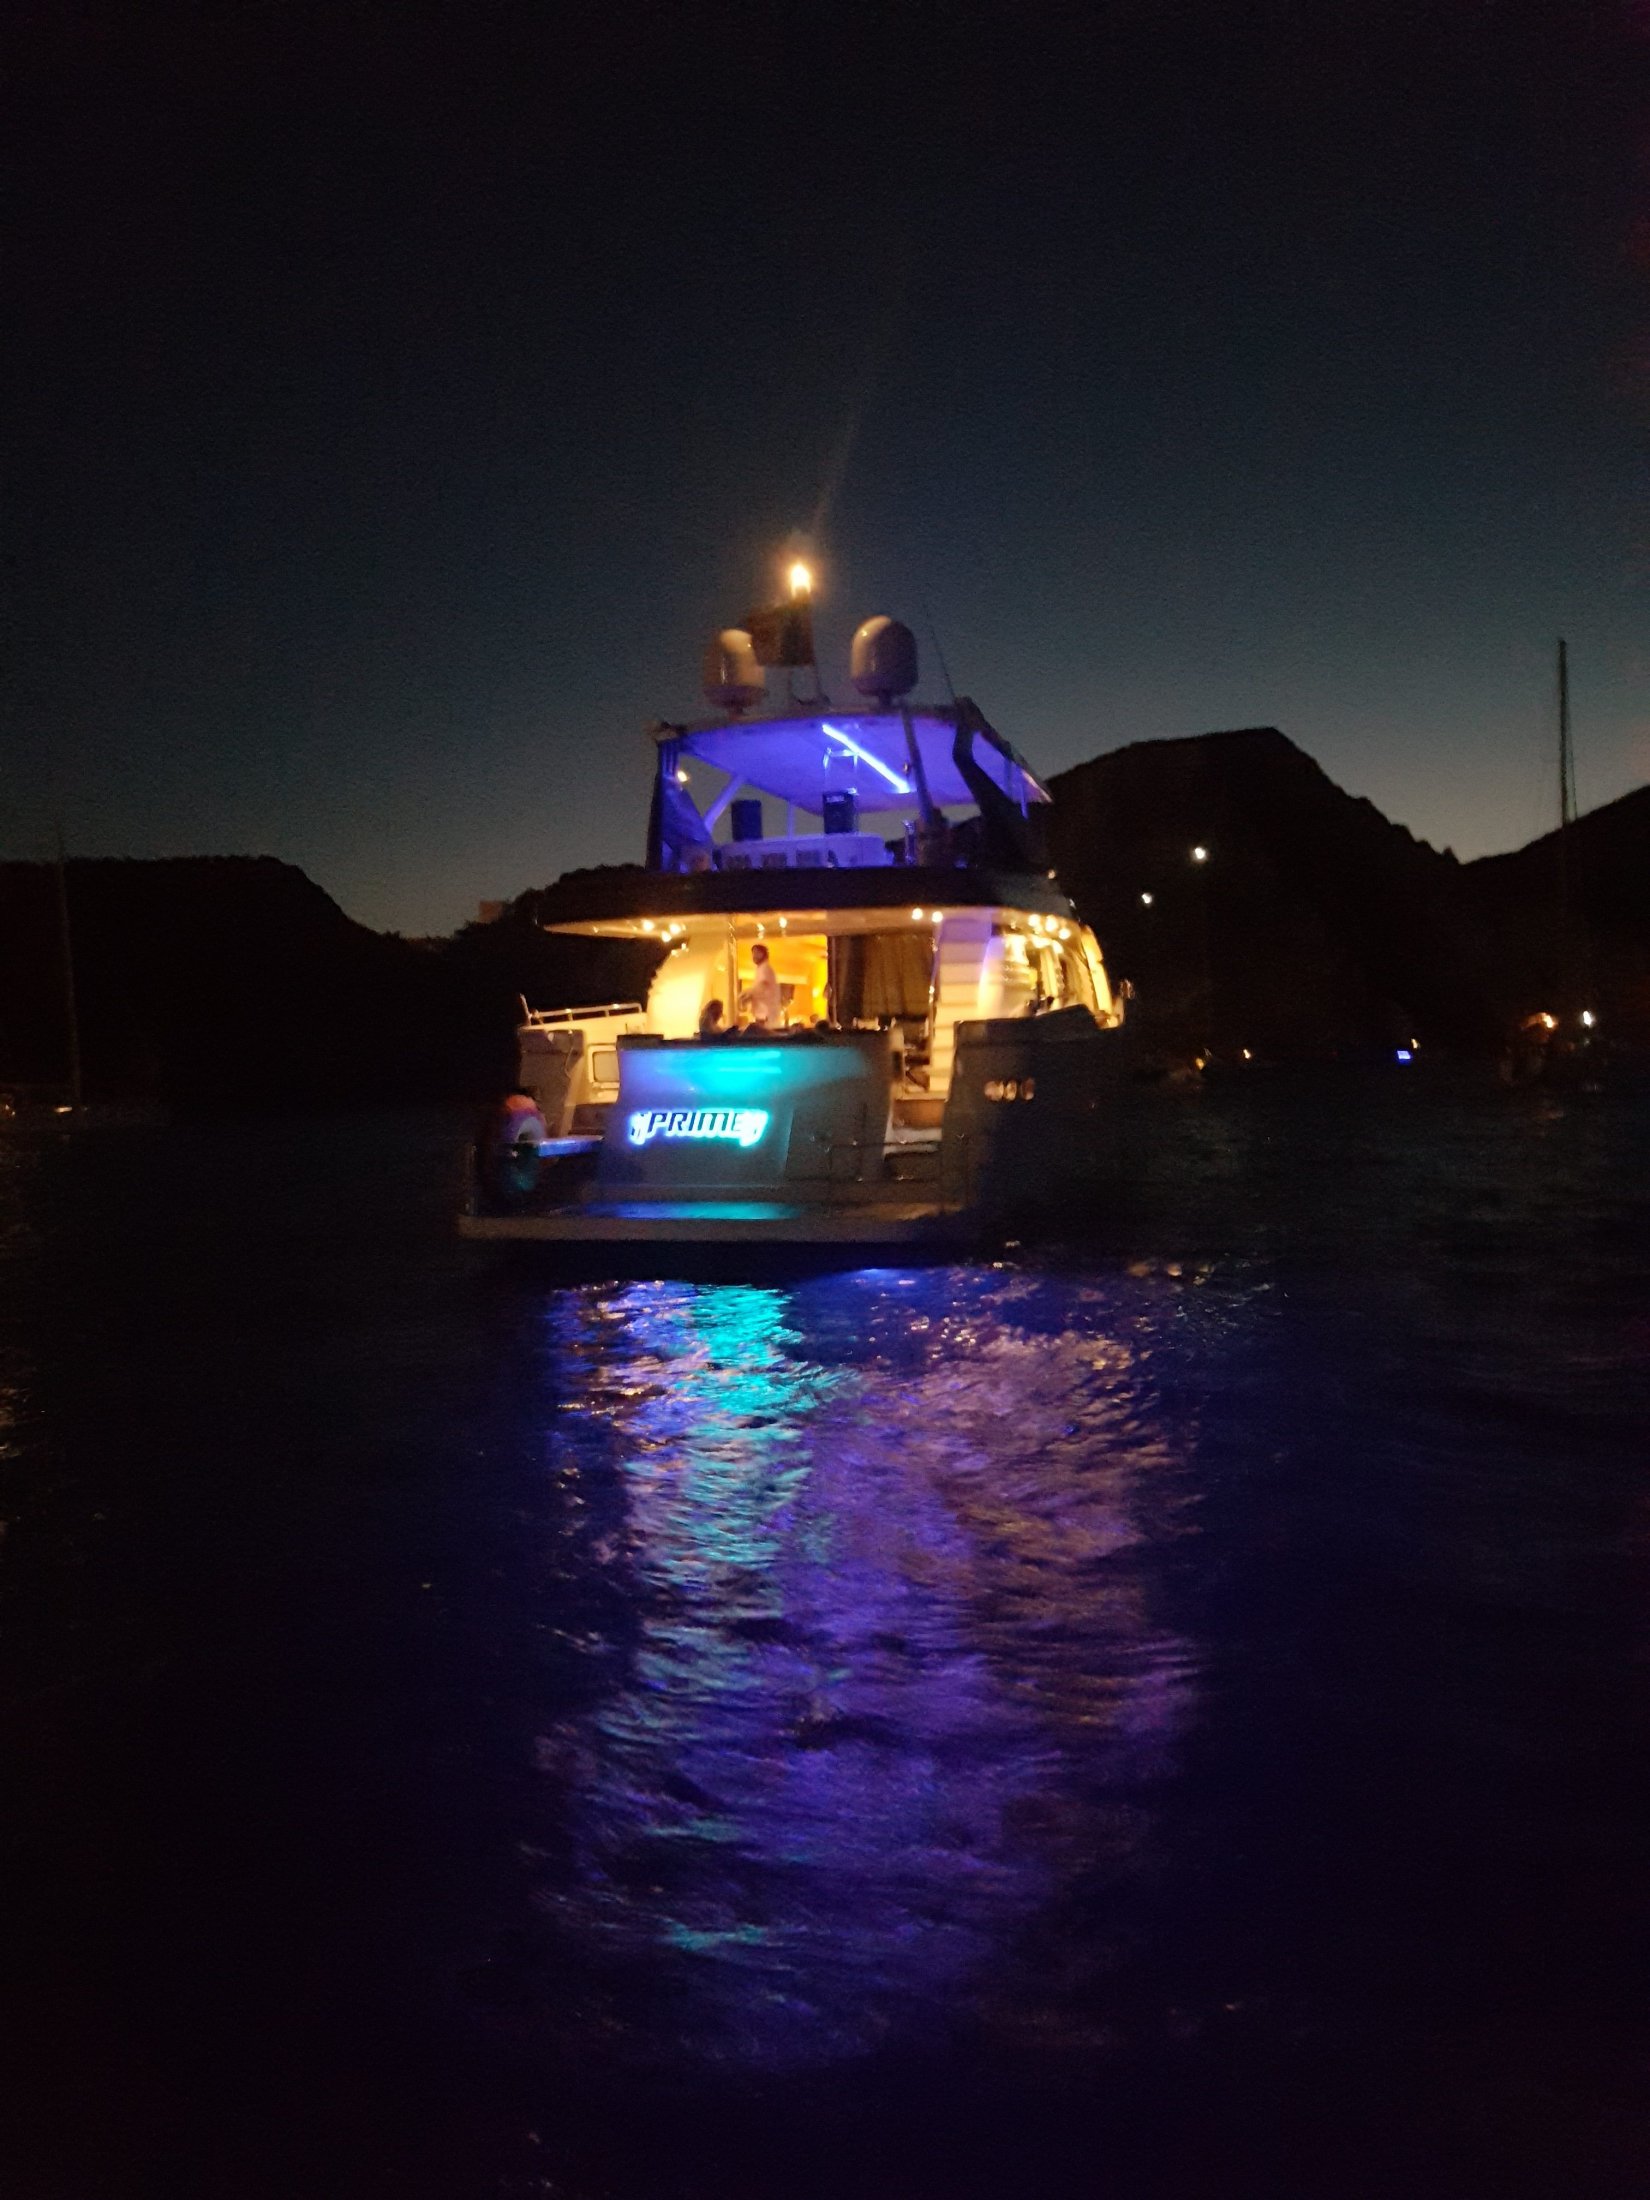 Charter-yacht-prime-party-night-e1515584583693